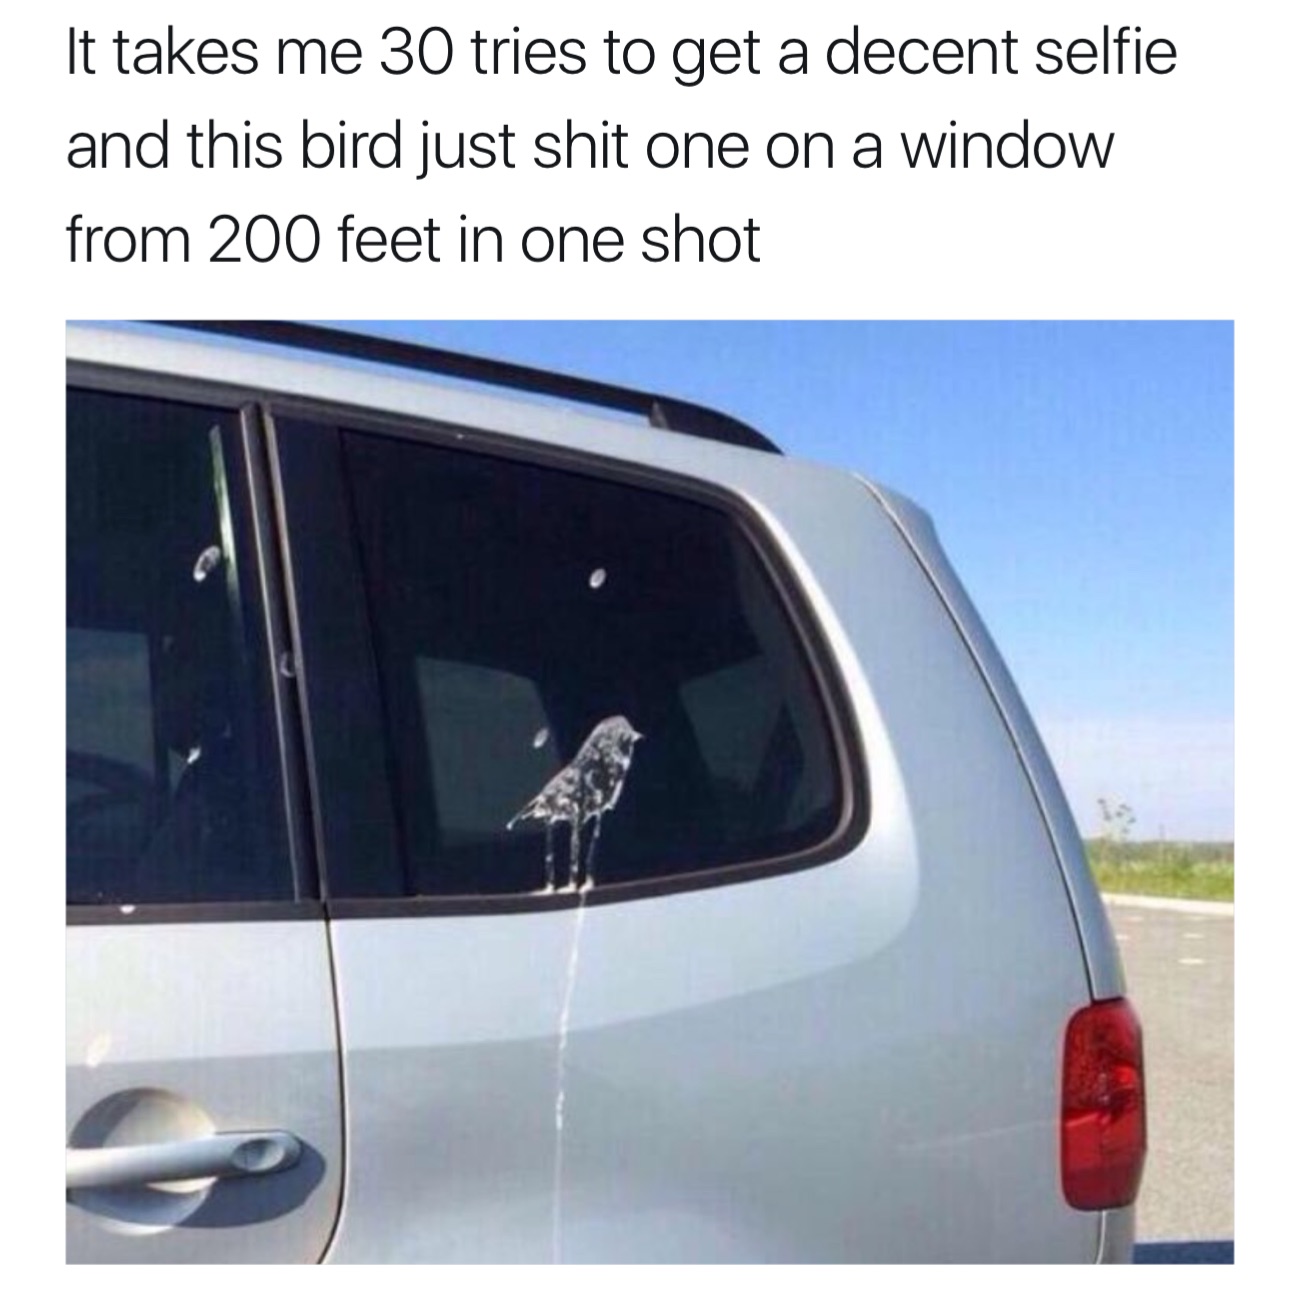 bird shits self portrait - It takes me 30 tries to get a decent selfie and this bird just shit one on a window from 200 feet in one shot